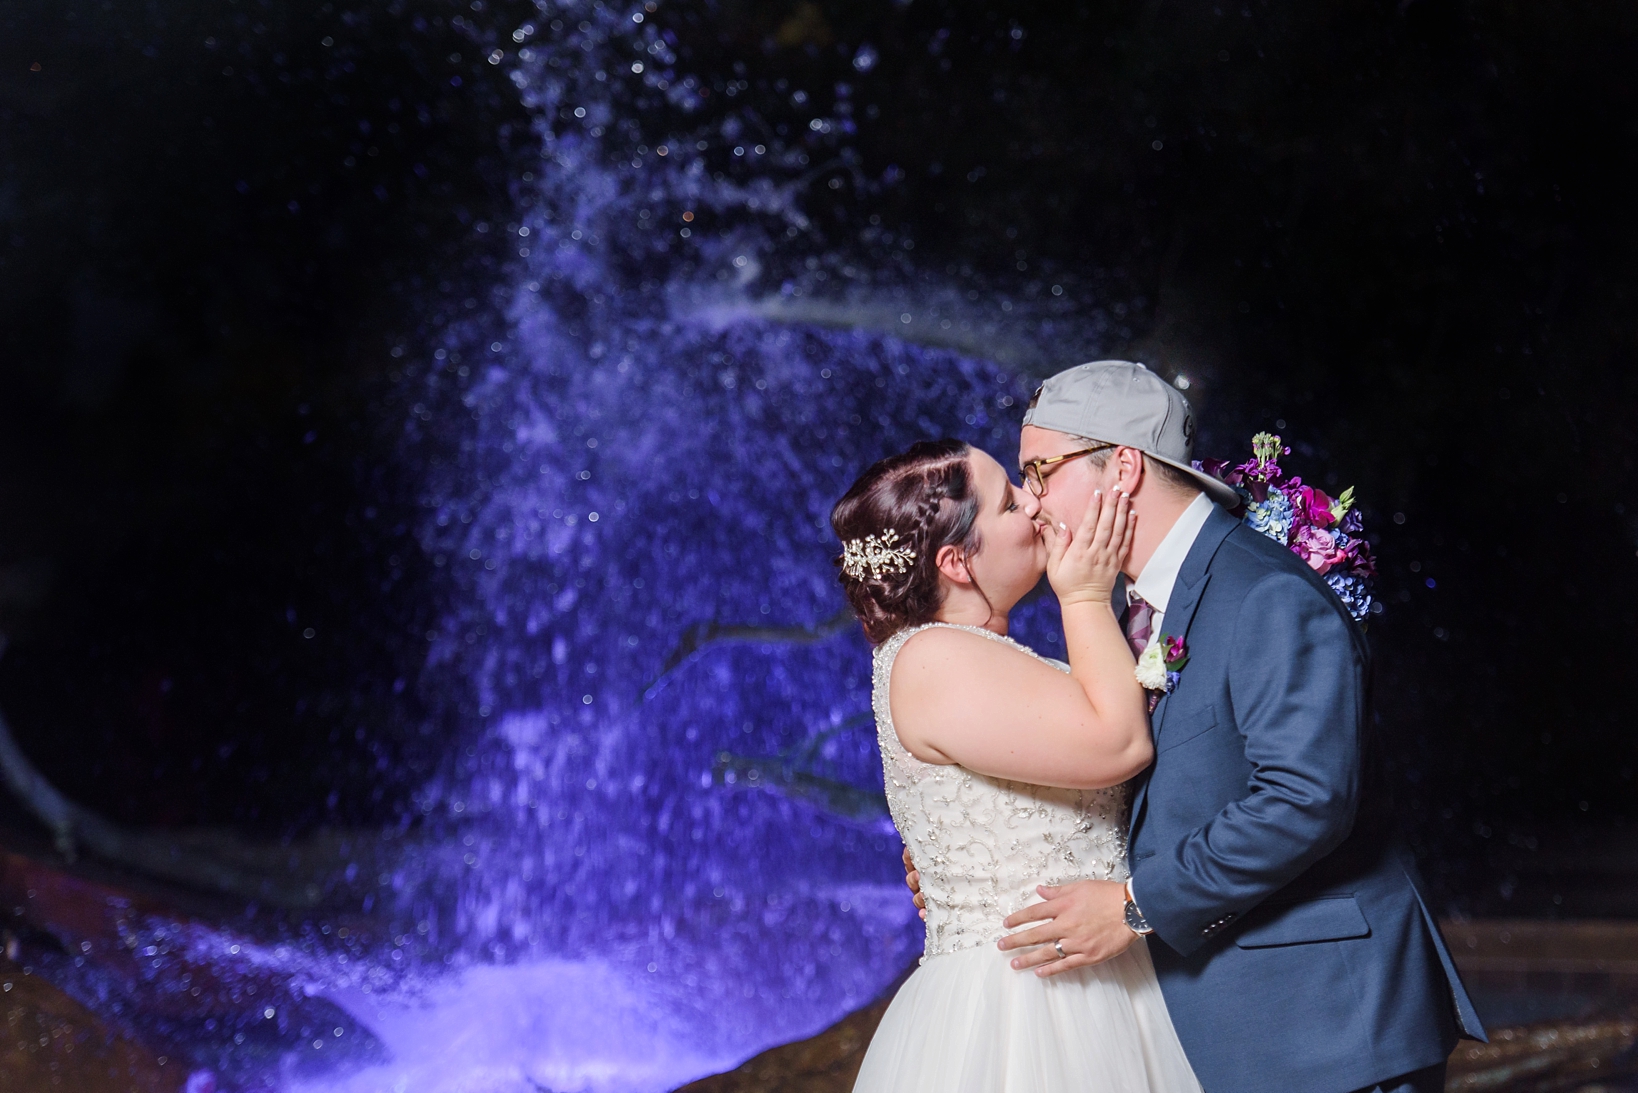 The fountain at night sure made for some epic night photos in Safety Harbor, FL by Sarah & Ben Photography